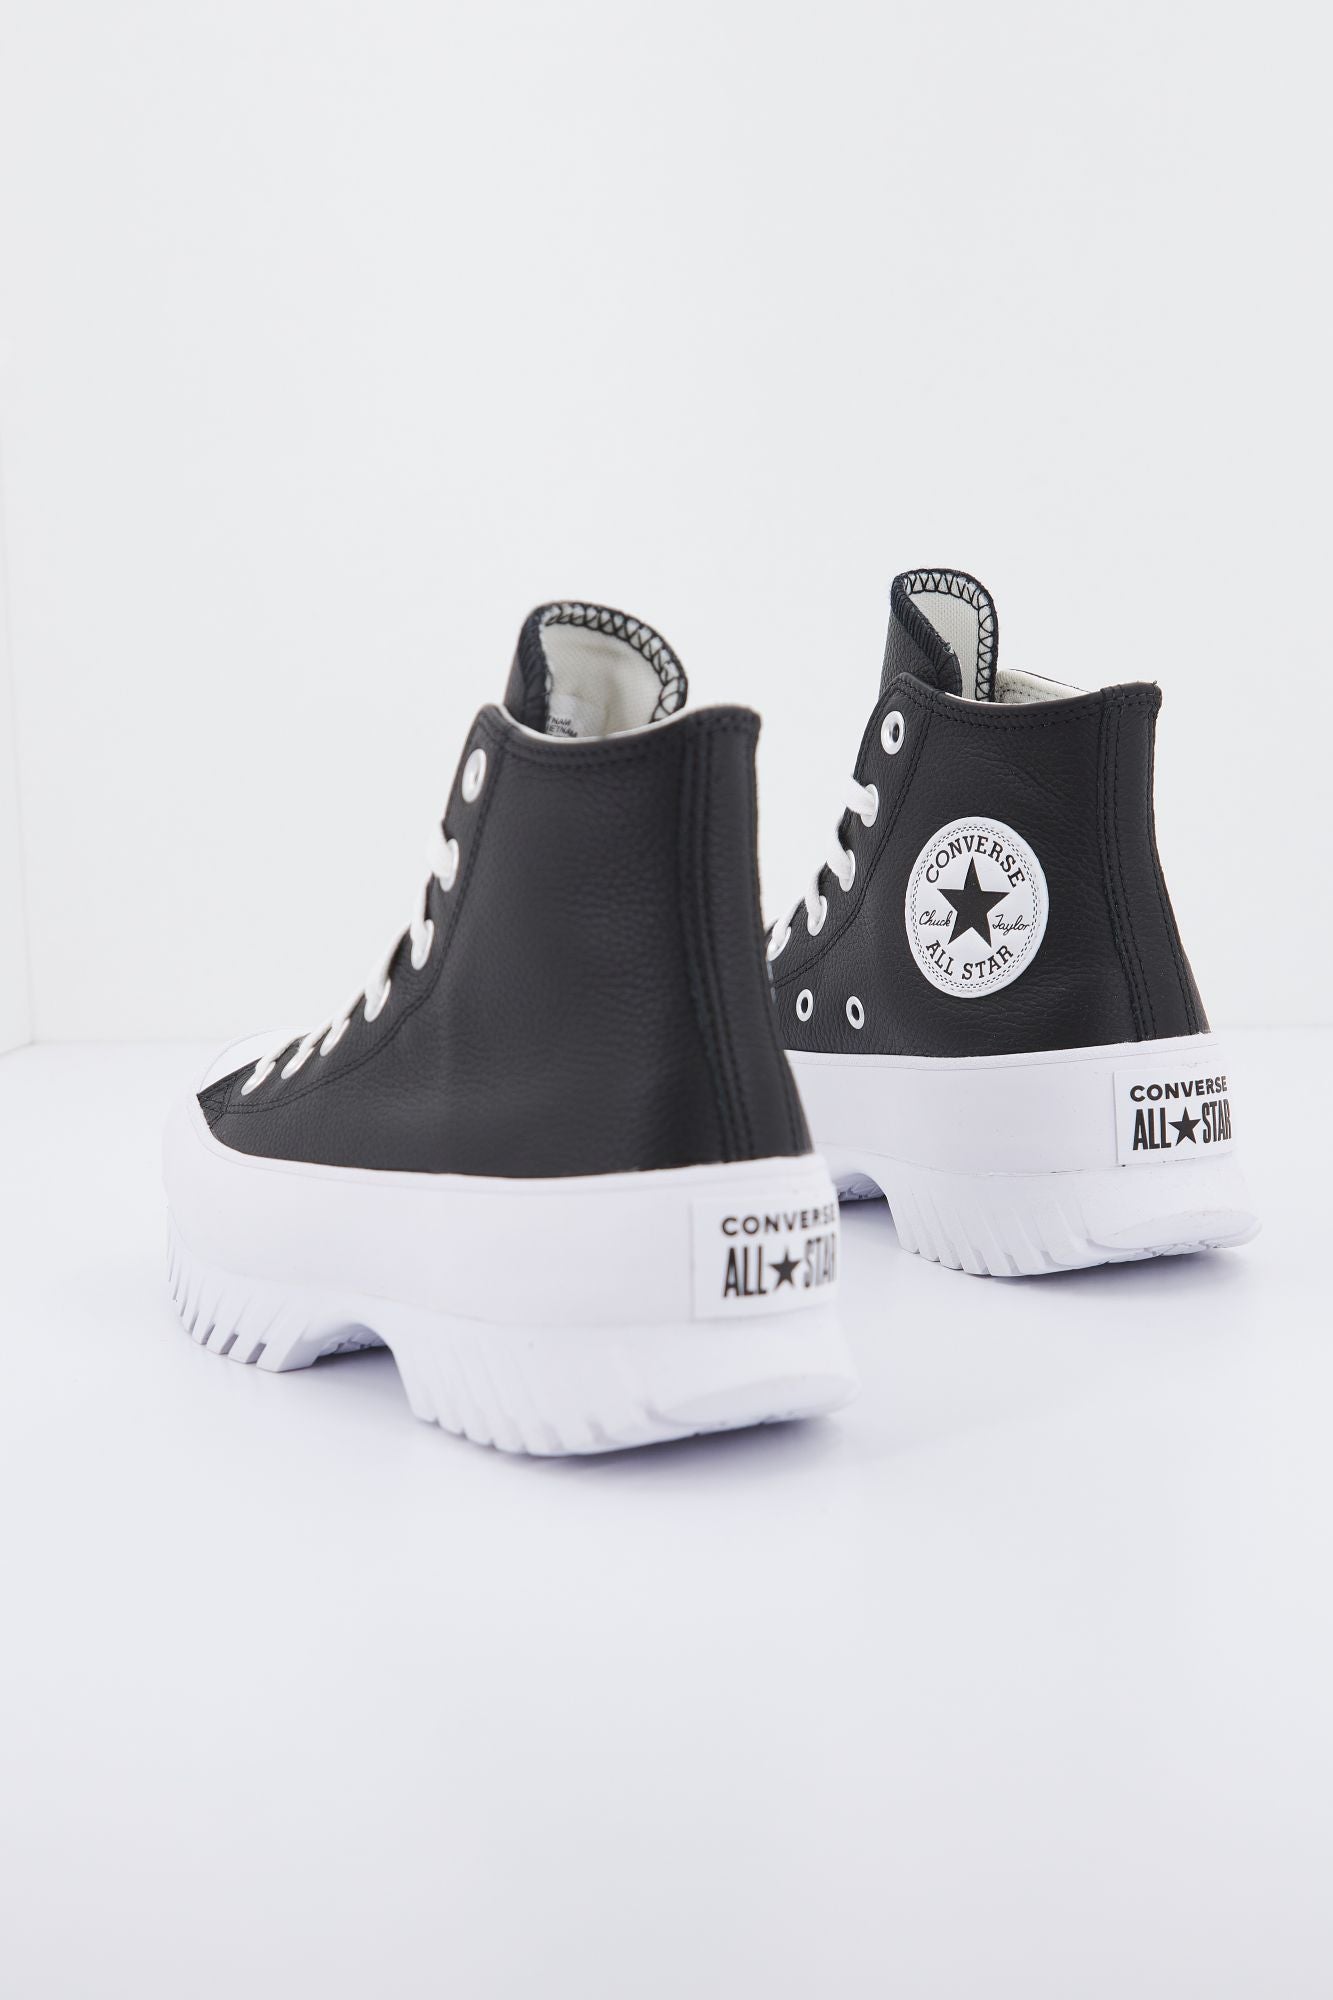 CONVERSE CHUCK TAYLOR ALL STAR LUGGED 2.0 LEATHER en color NEGRO (3)